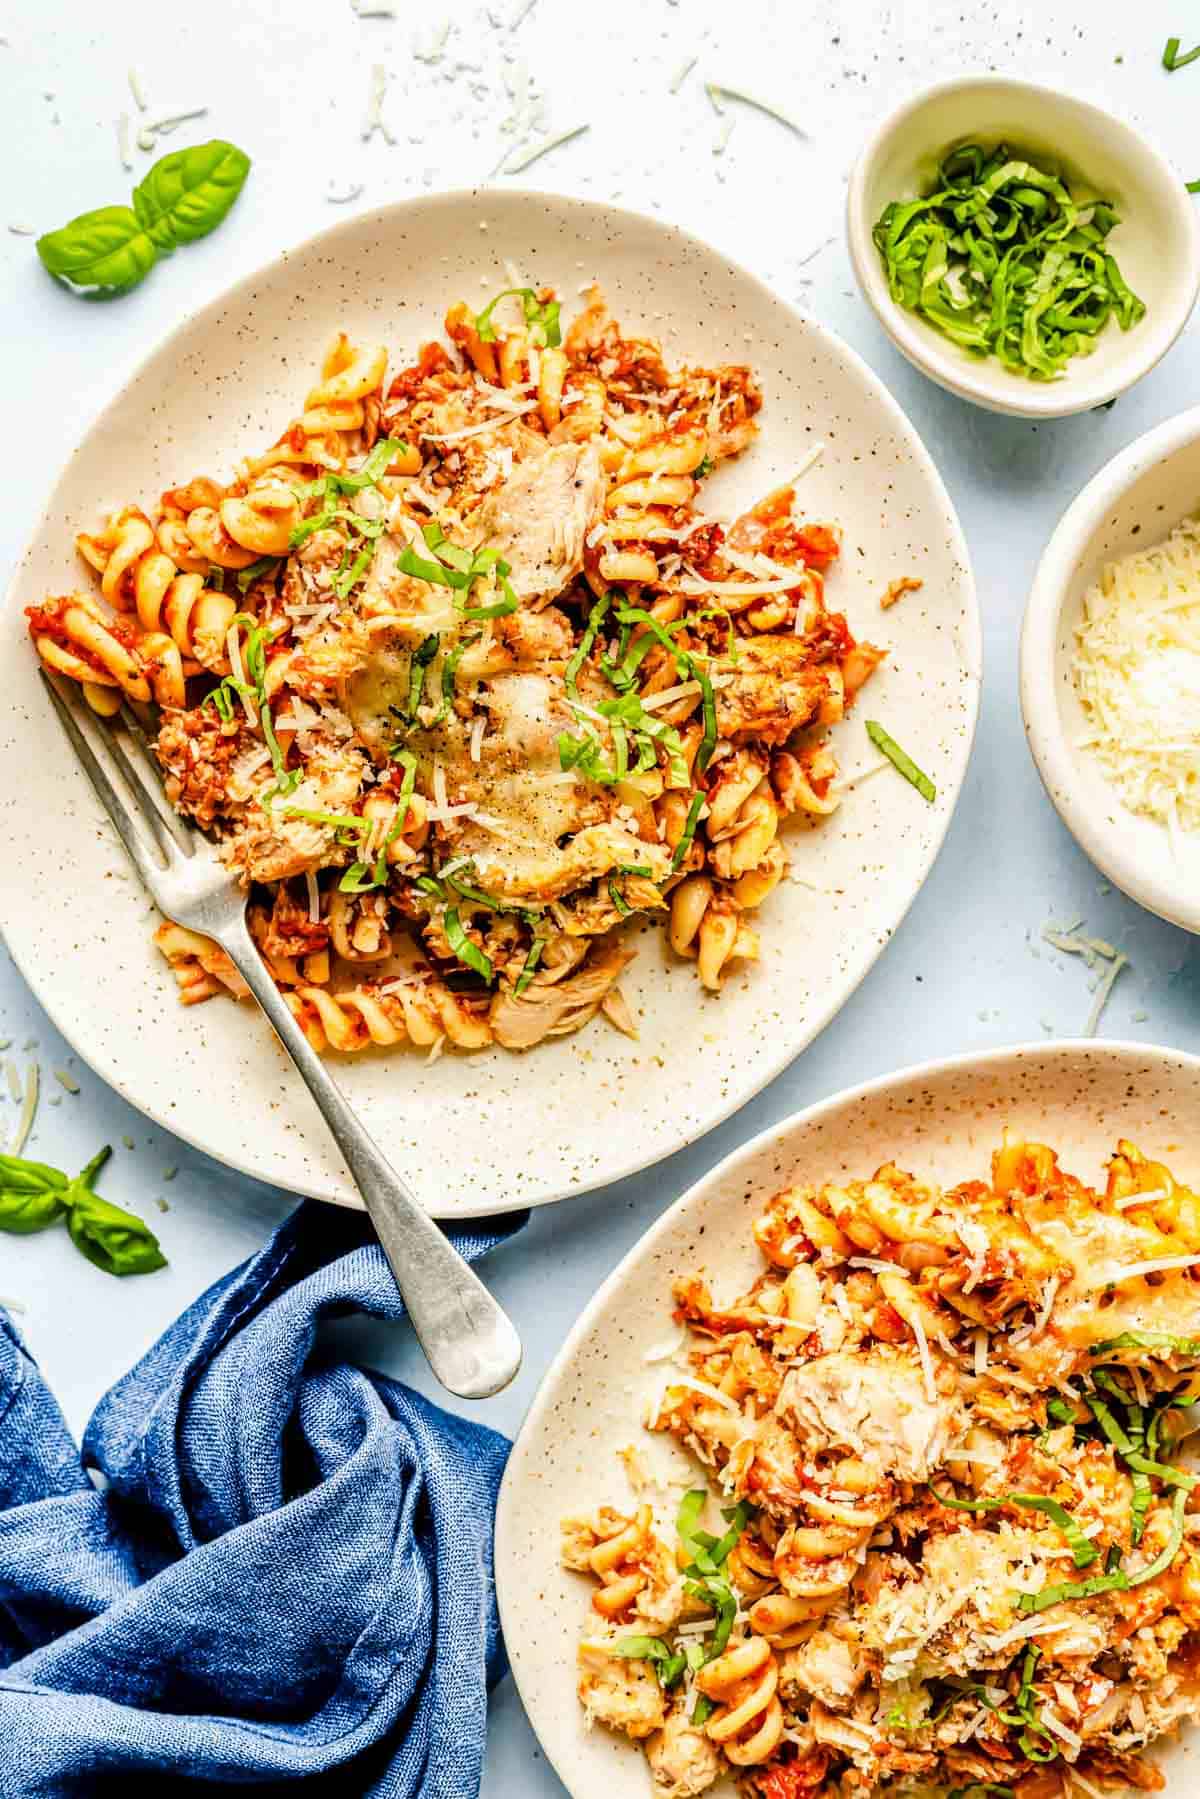 tuna pasta bake plated on two plates with a metal fork next to bowls of fresh basil and parmesan cheese